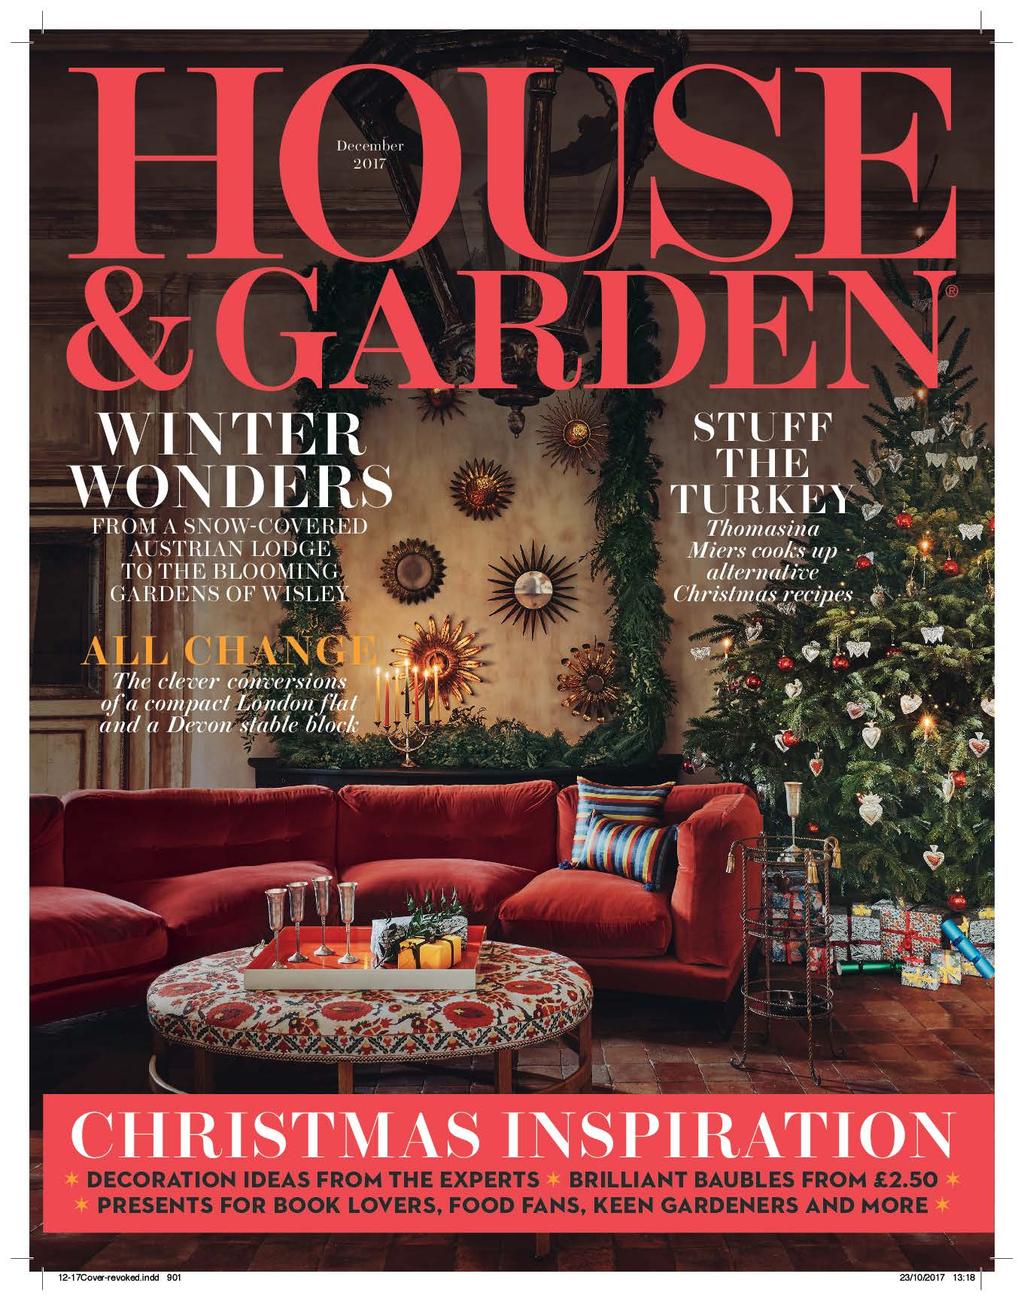 HOUSE & GARDEN CIRCULATION READERSHIP SUBSCRIPTIONS TRADE READERSHIP* UNIQUE USERS PAGE IMPRESSIONS FACEBOOK TWITTER INSTAGRAM PINTEREST 111,017 389,000 36,599 66,130 687,036 2,767,683 6,103,479